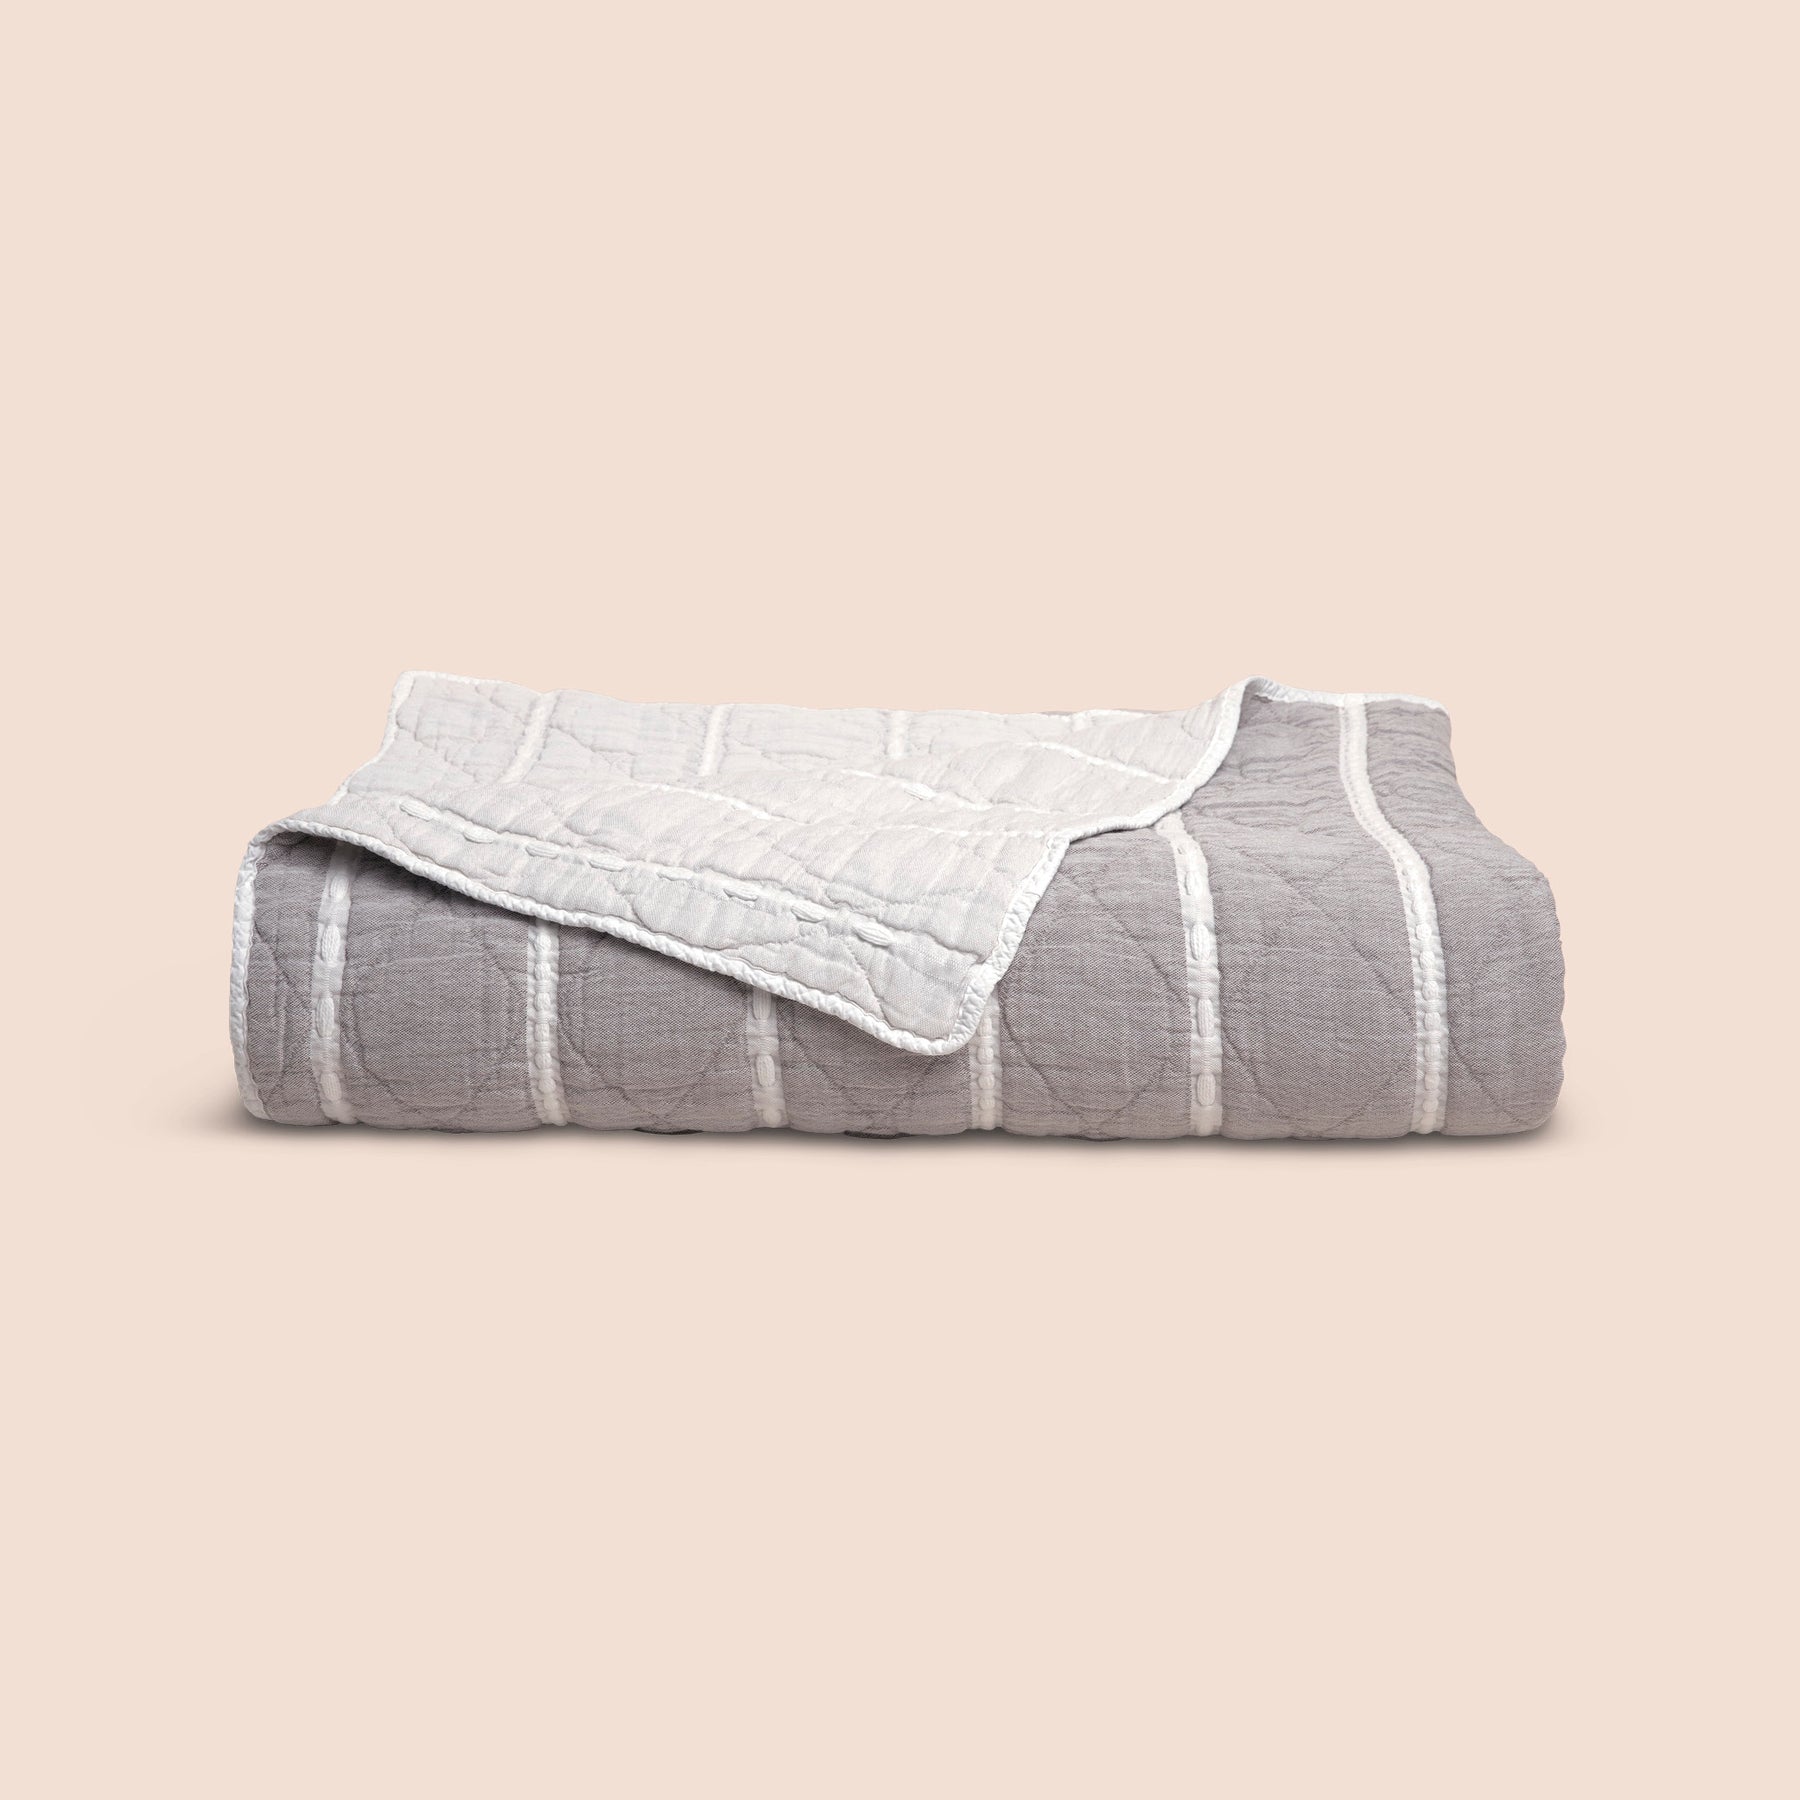 Image of a neatly folded gray and white striped Heritage Quilt with a corner folded over to reveal the reversible lighter side on a light pink background